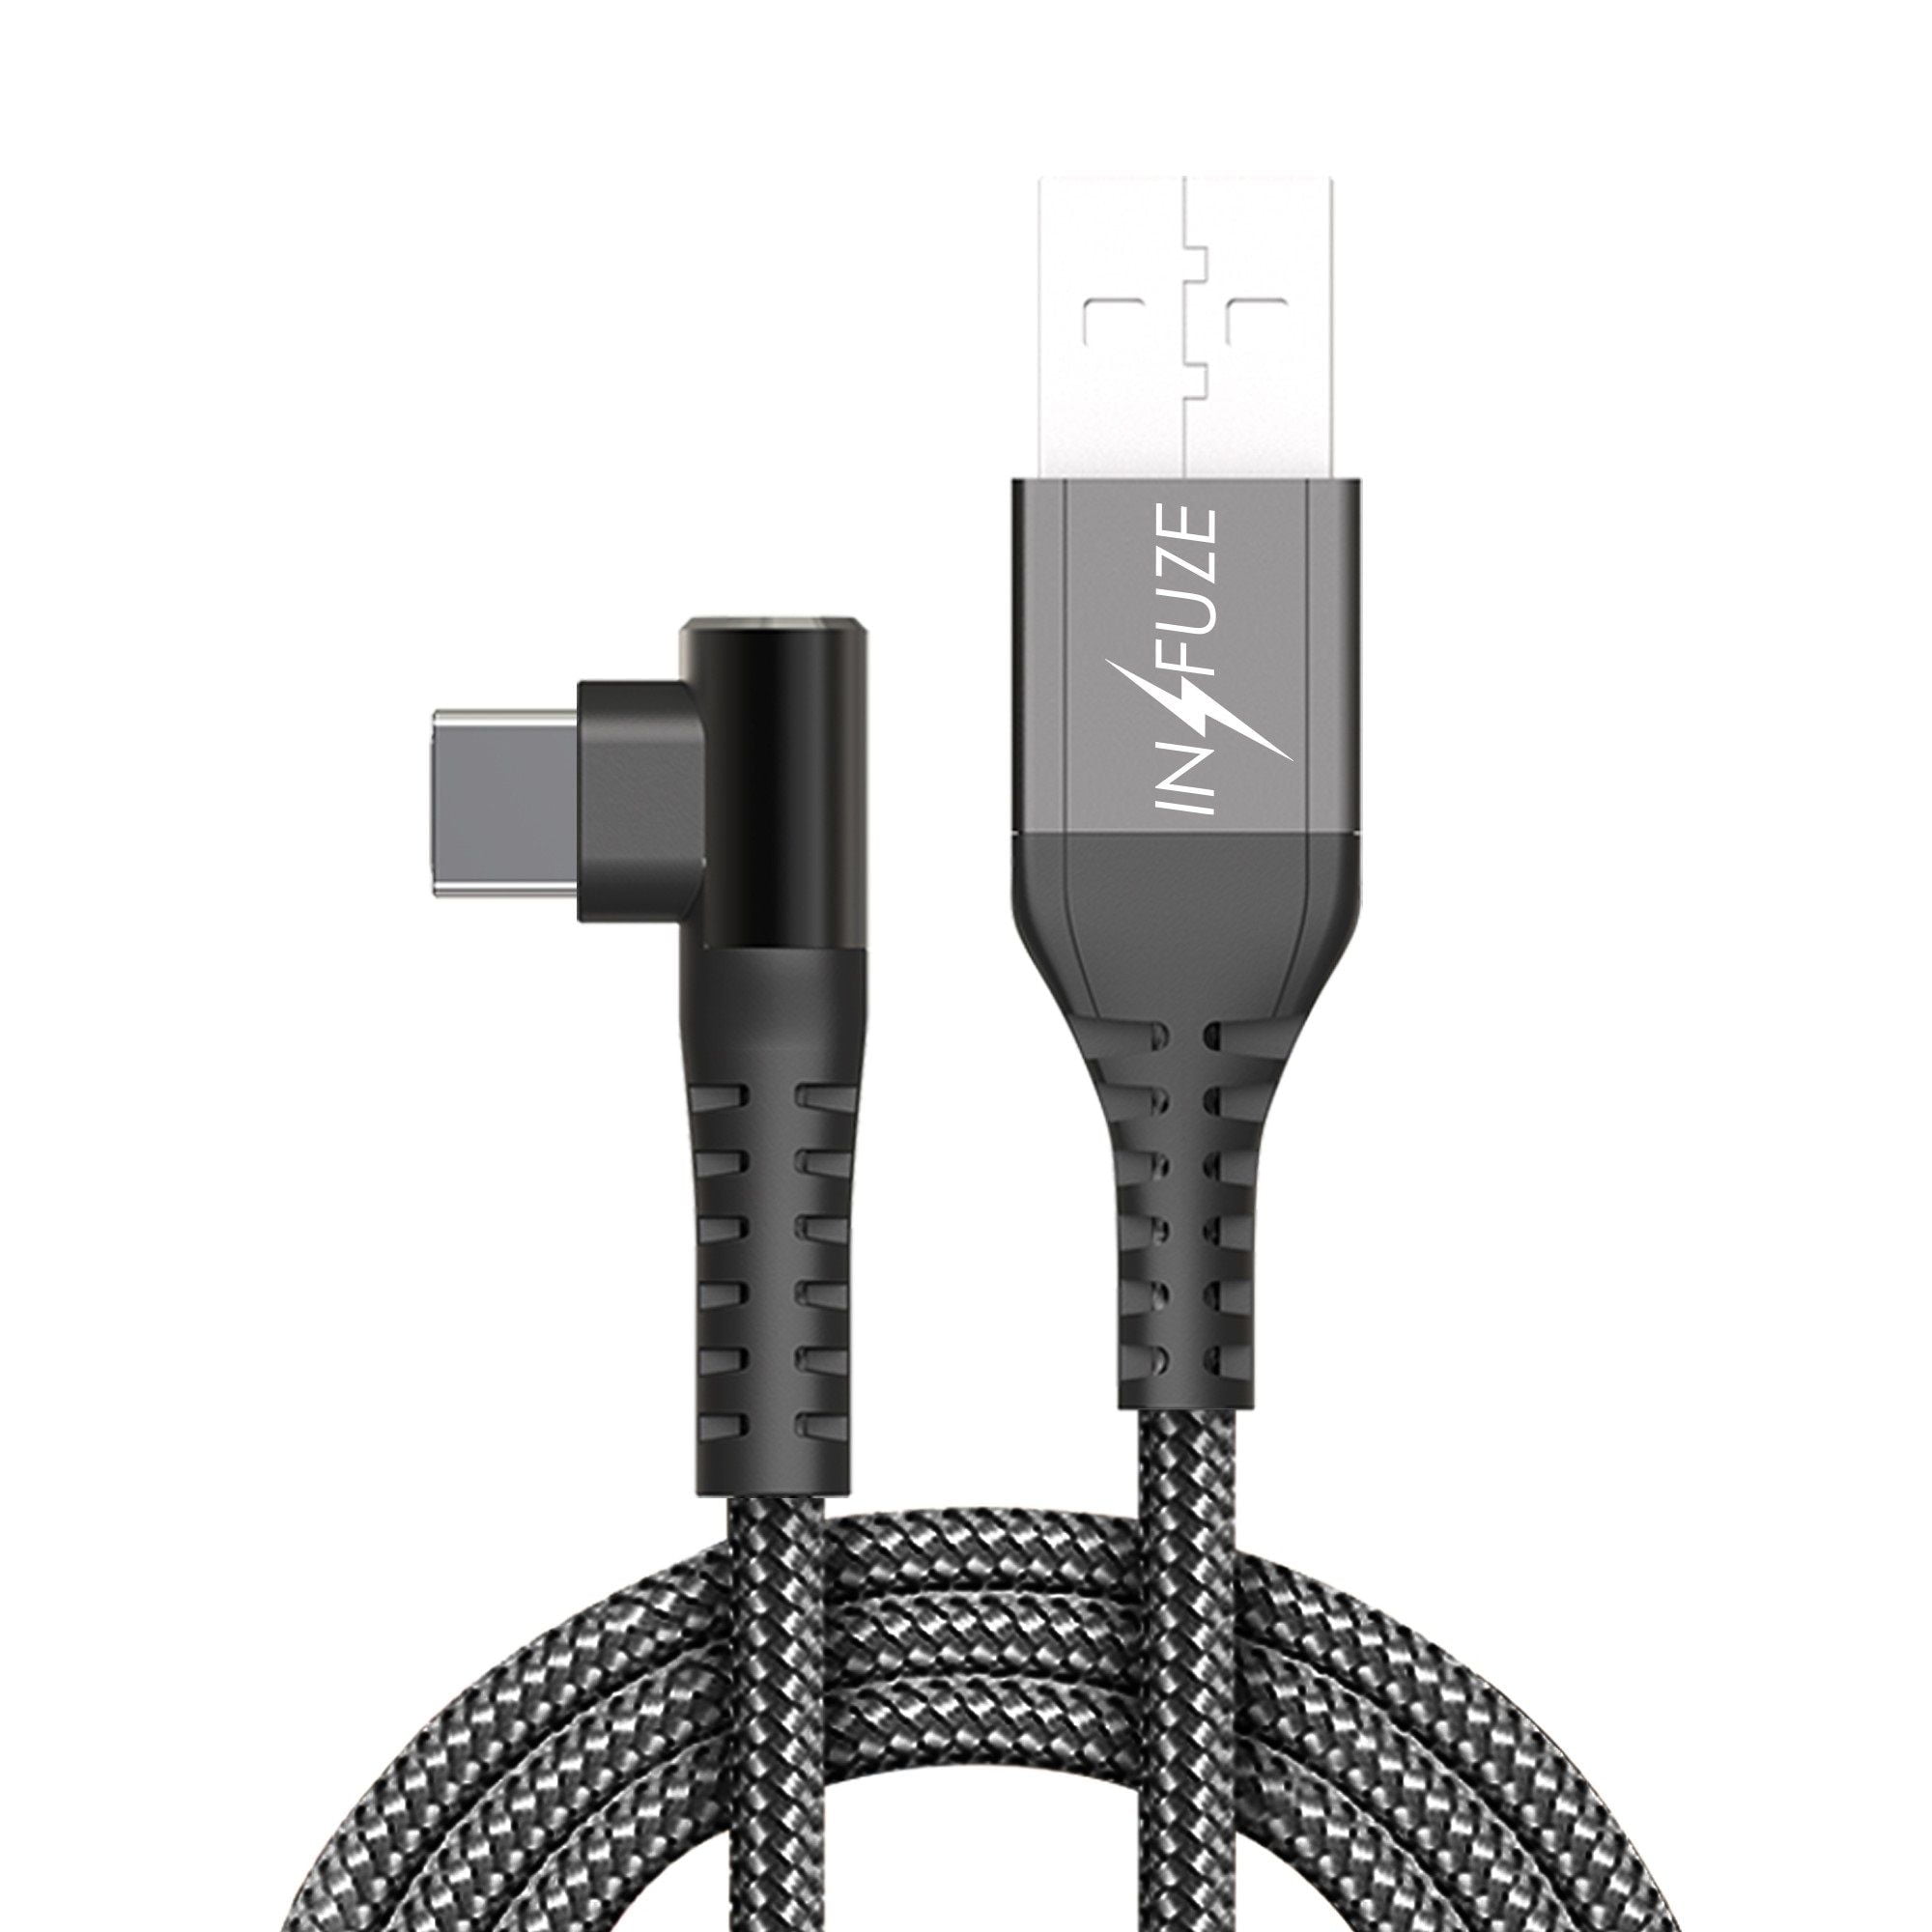 PRO OTG Cable Works for Kyocera Contact Right Angle Cable Connects You to Any Compatible USB Device with MicroUSB 